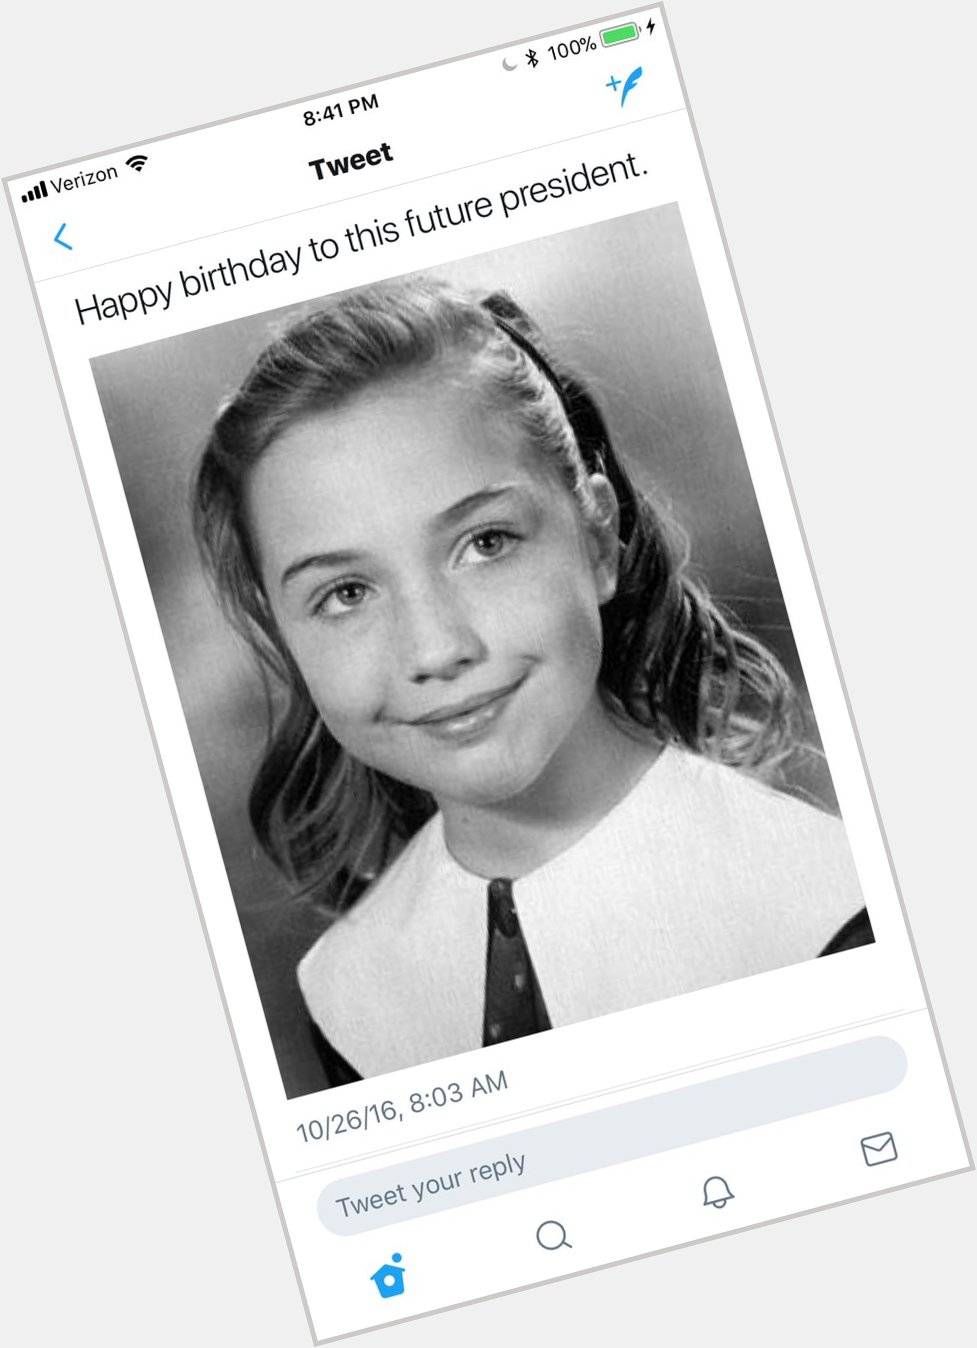  Happy 70th Birthday Hillary Clinton! messages that didn t age well. Lol!   